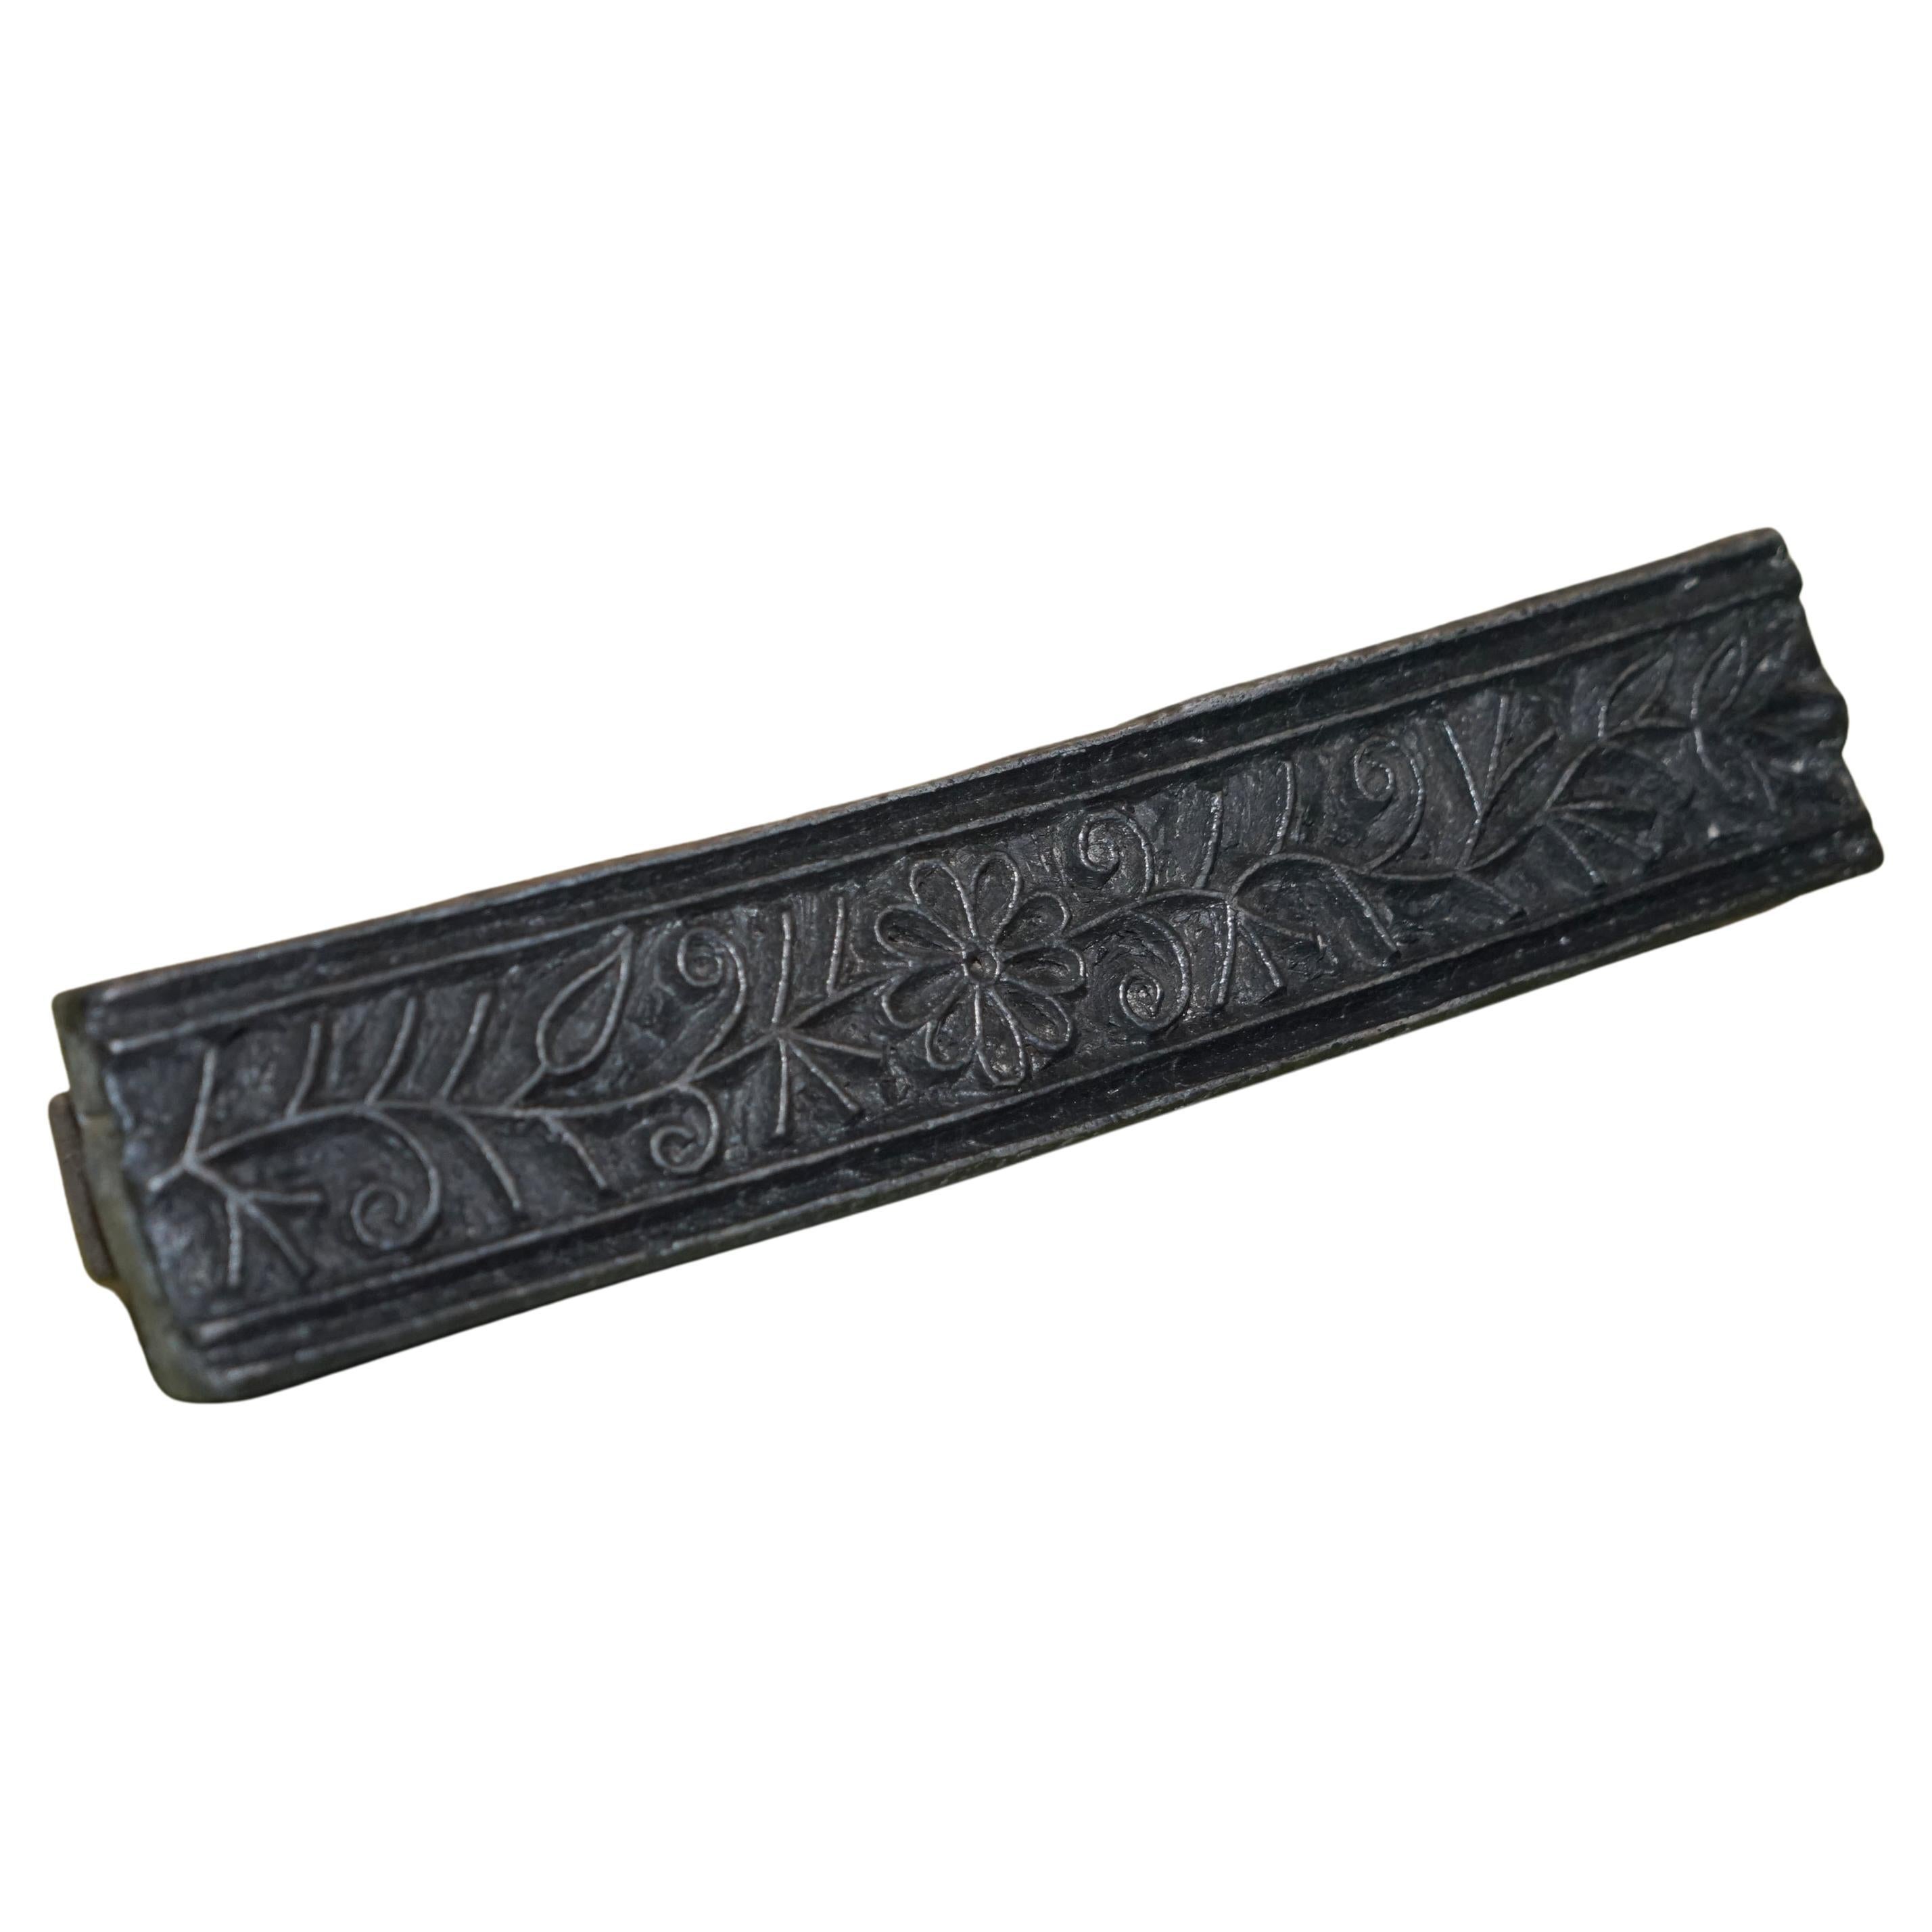 Very Collectable Antique Hand Carved Floral Boarder Printing Block for Wallpaper For Sale